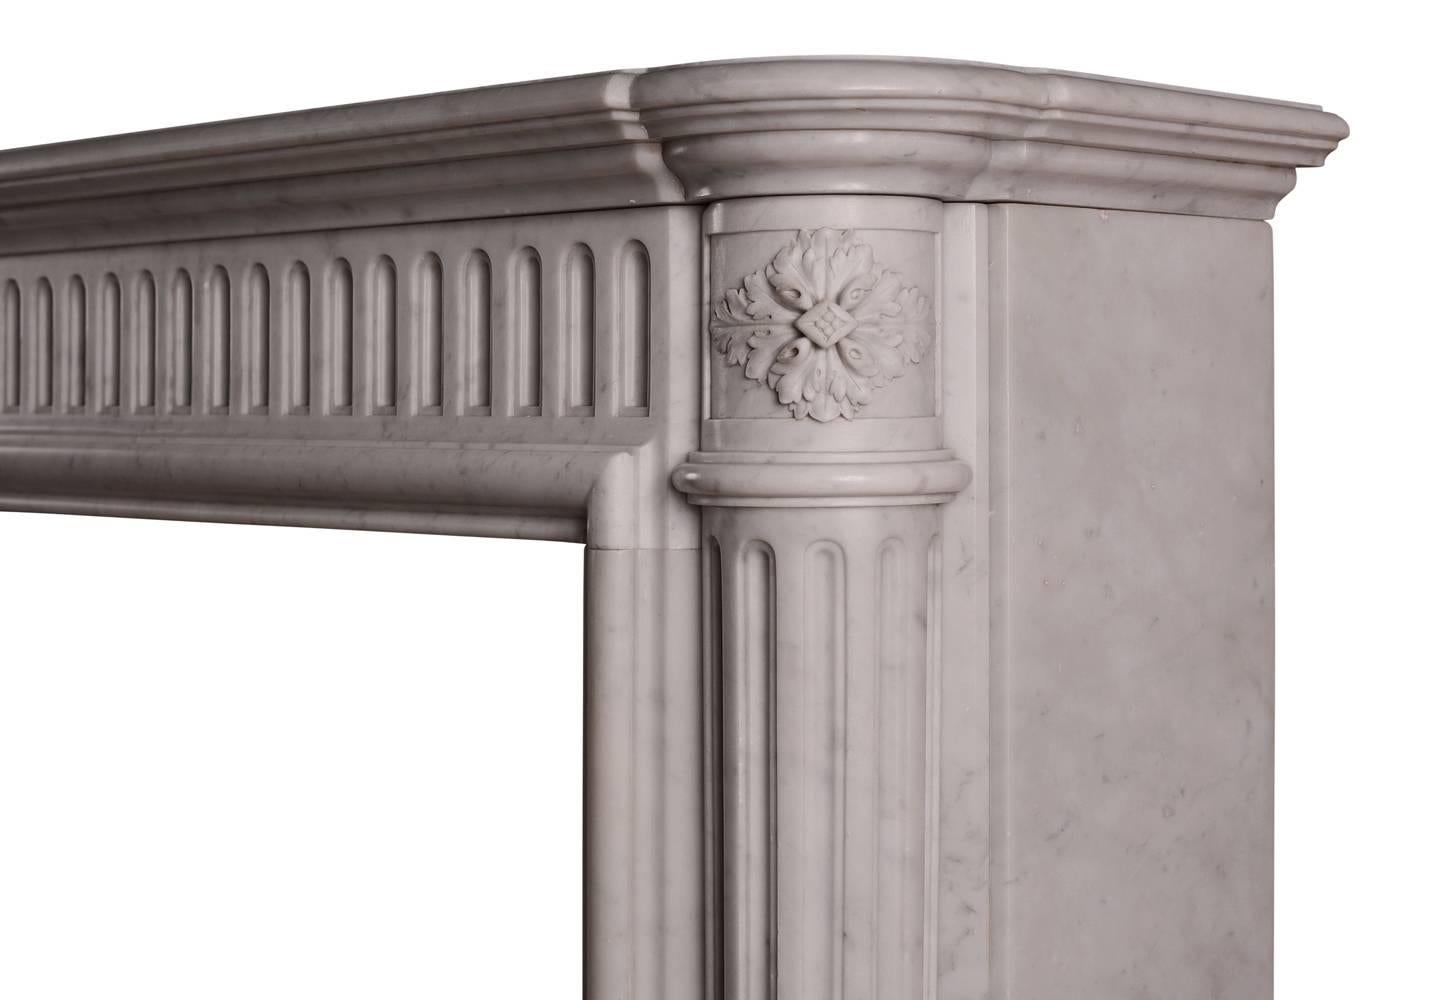 An unusually tall French marble fireplace in the Louis XVI manner. The elegant jambs with tapering, fluted columns surmounted by carved capitals, the frieze with fluting throughout surmounted by moulded shelf above. 19th century.

Shelf Width - 1285